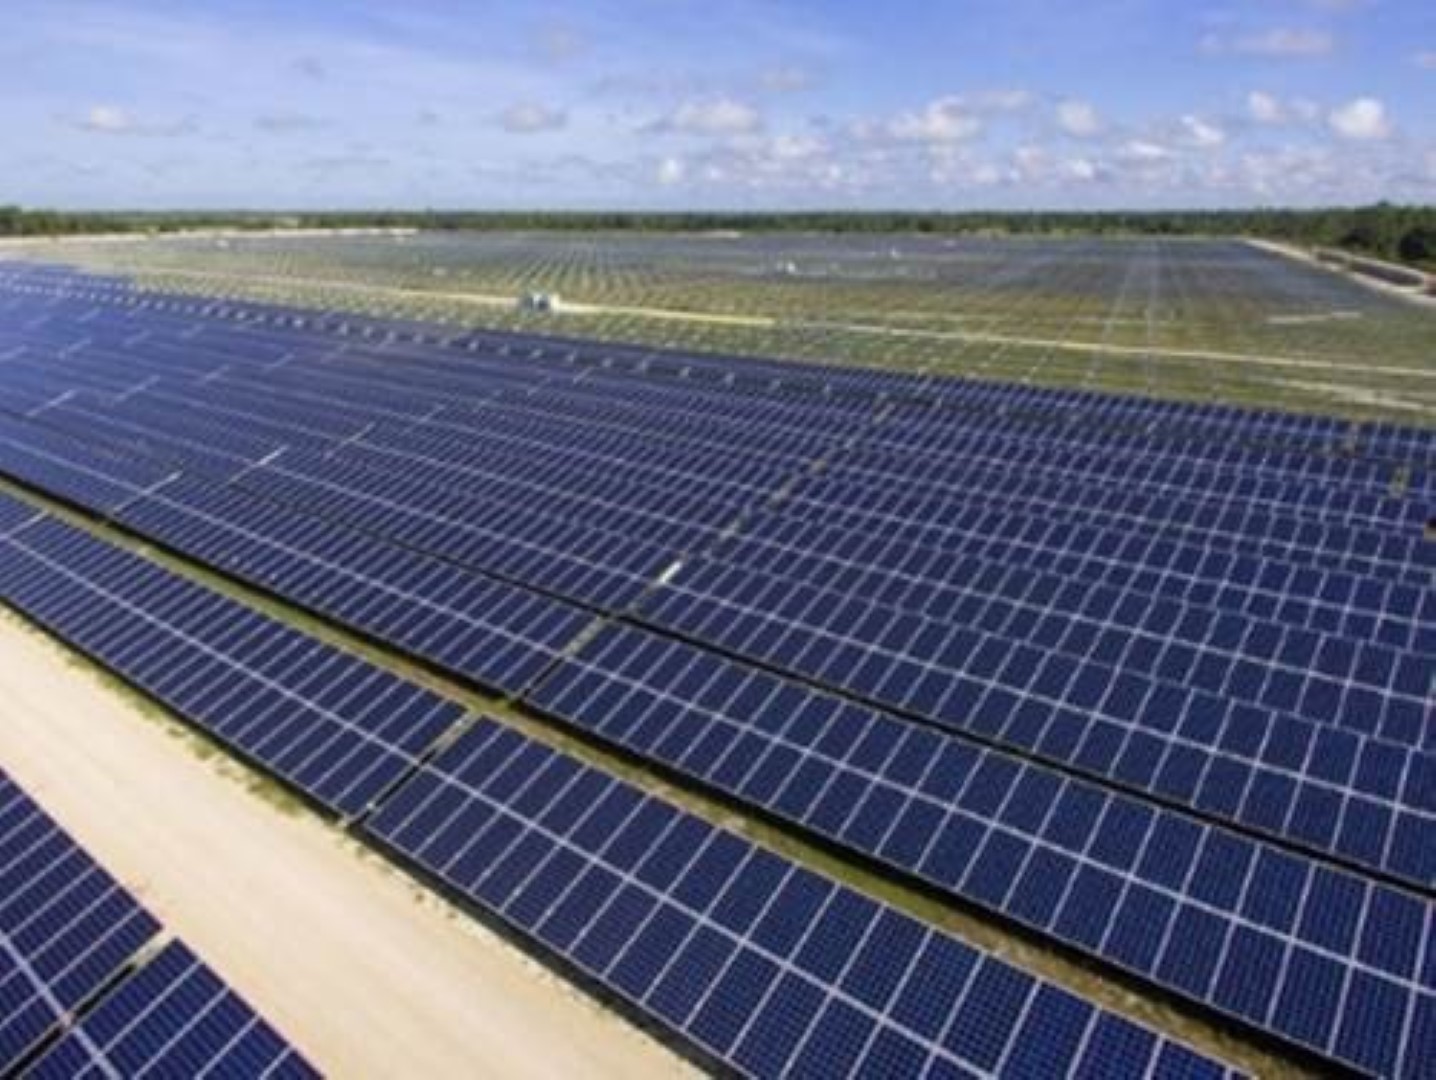 fpl-to-build-8-new-florida-solar-energy-plants-add-2-5m-panels-by-2018